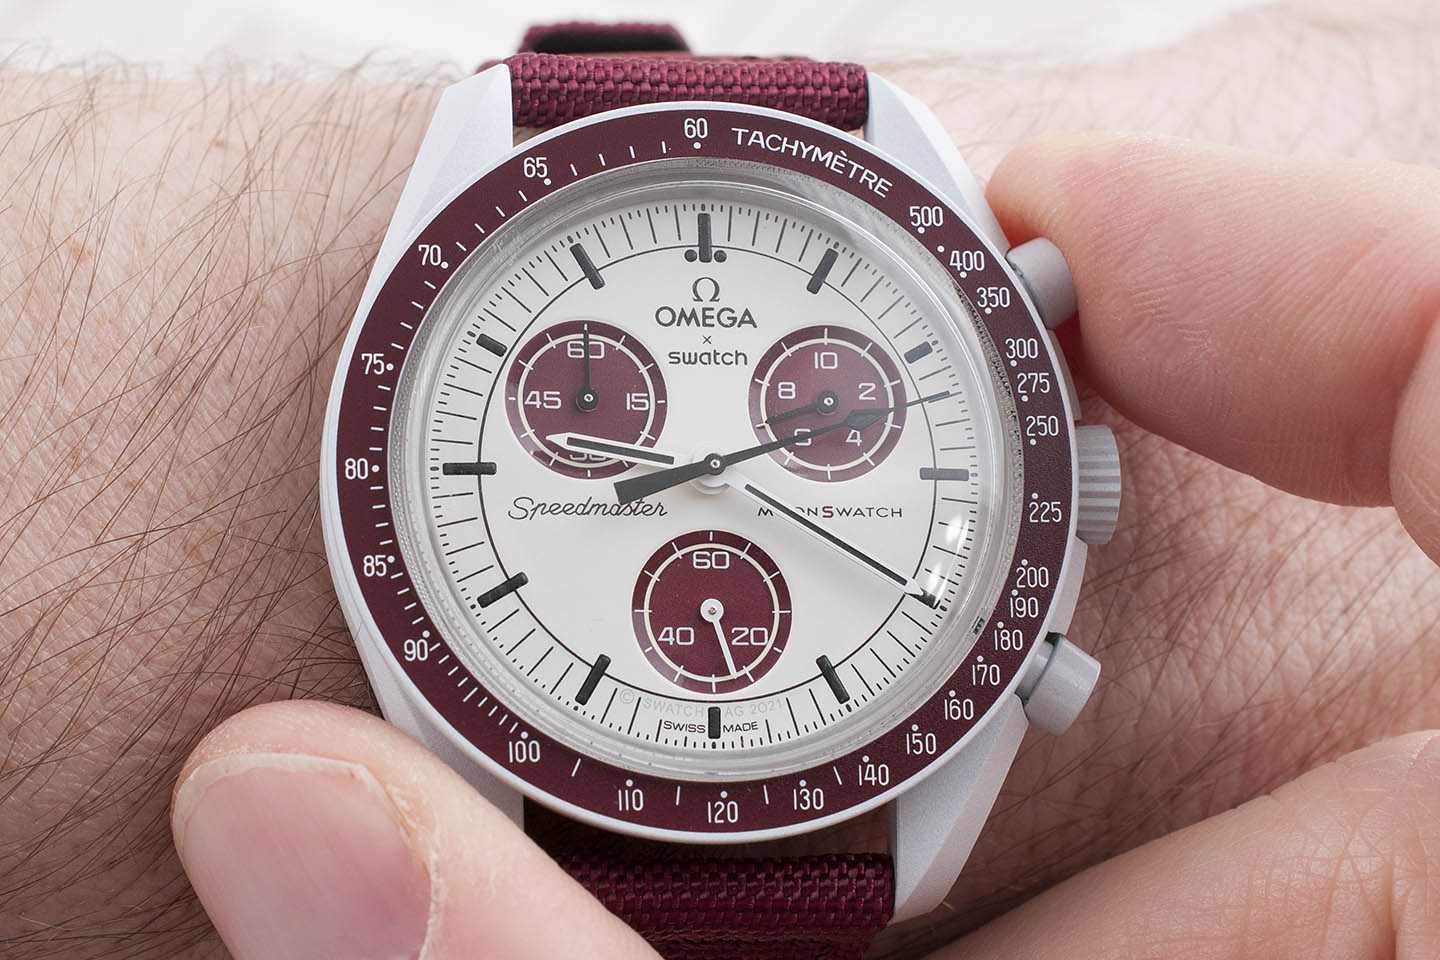 OMEGA SWATCH MISSION TO PLUTO